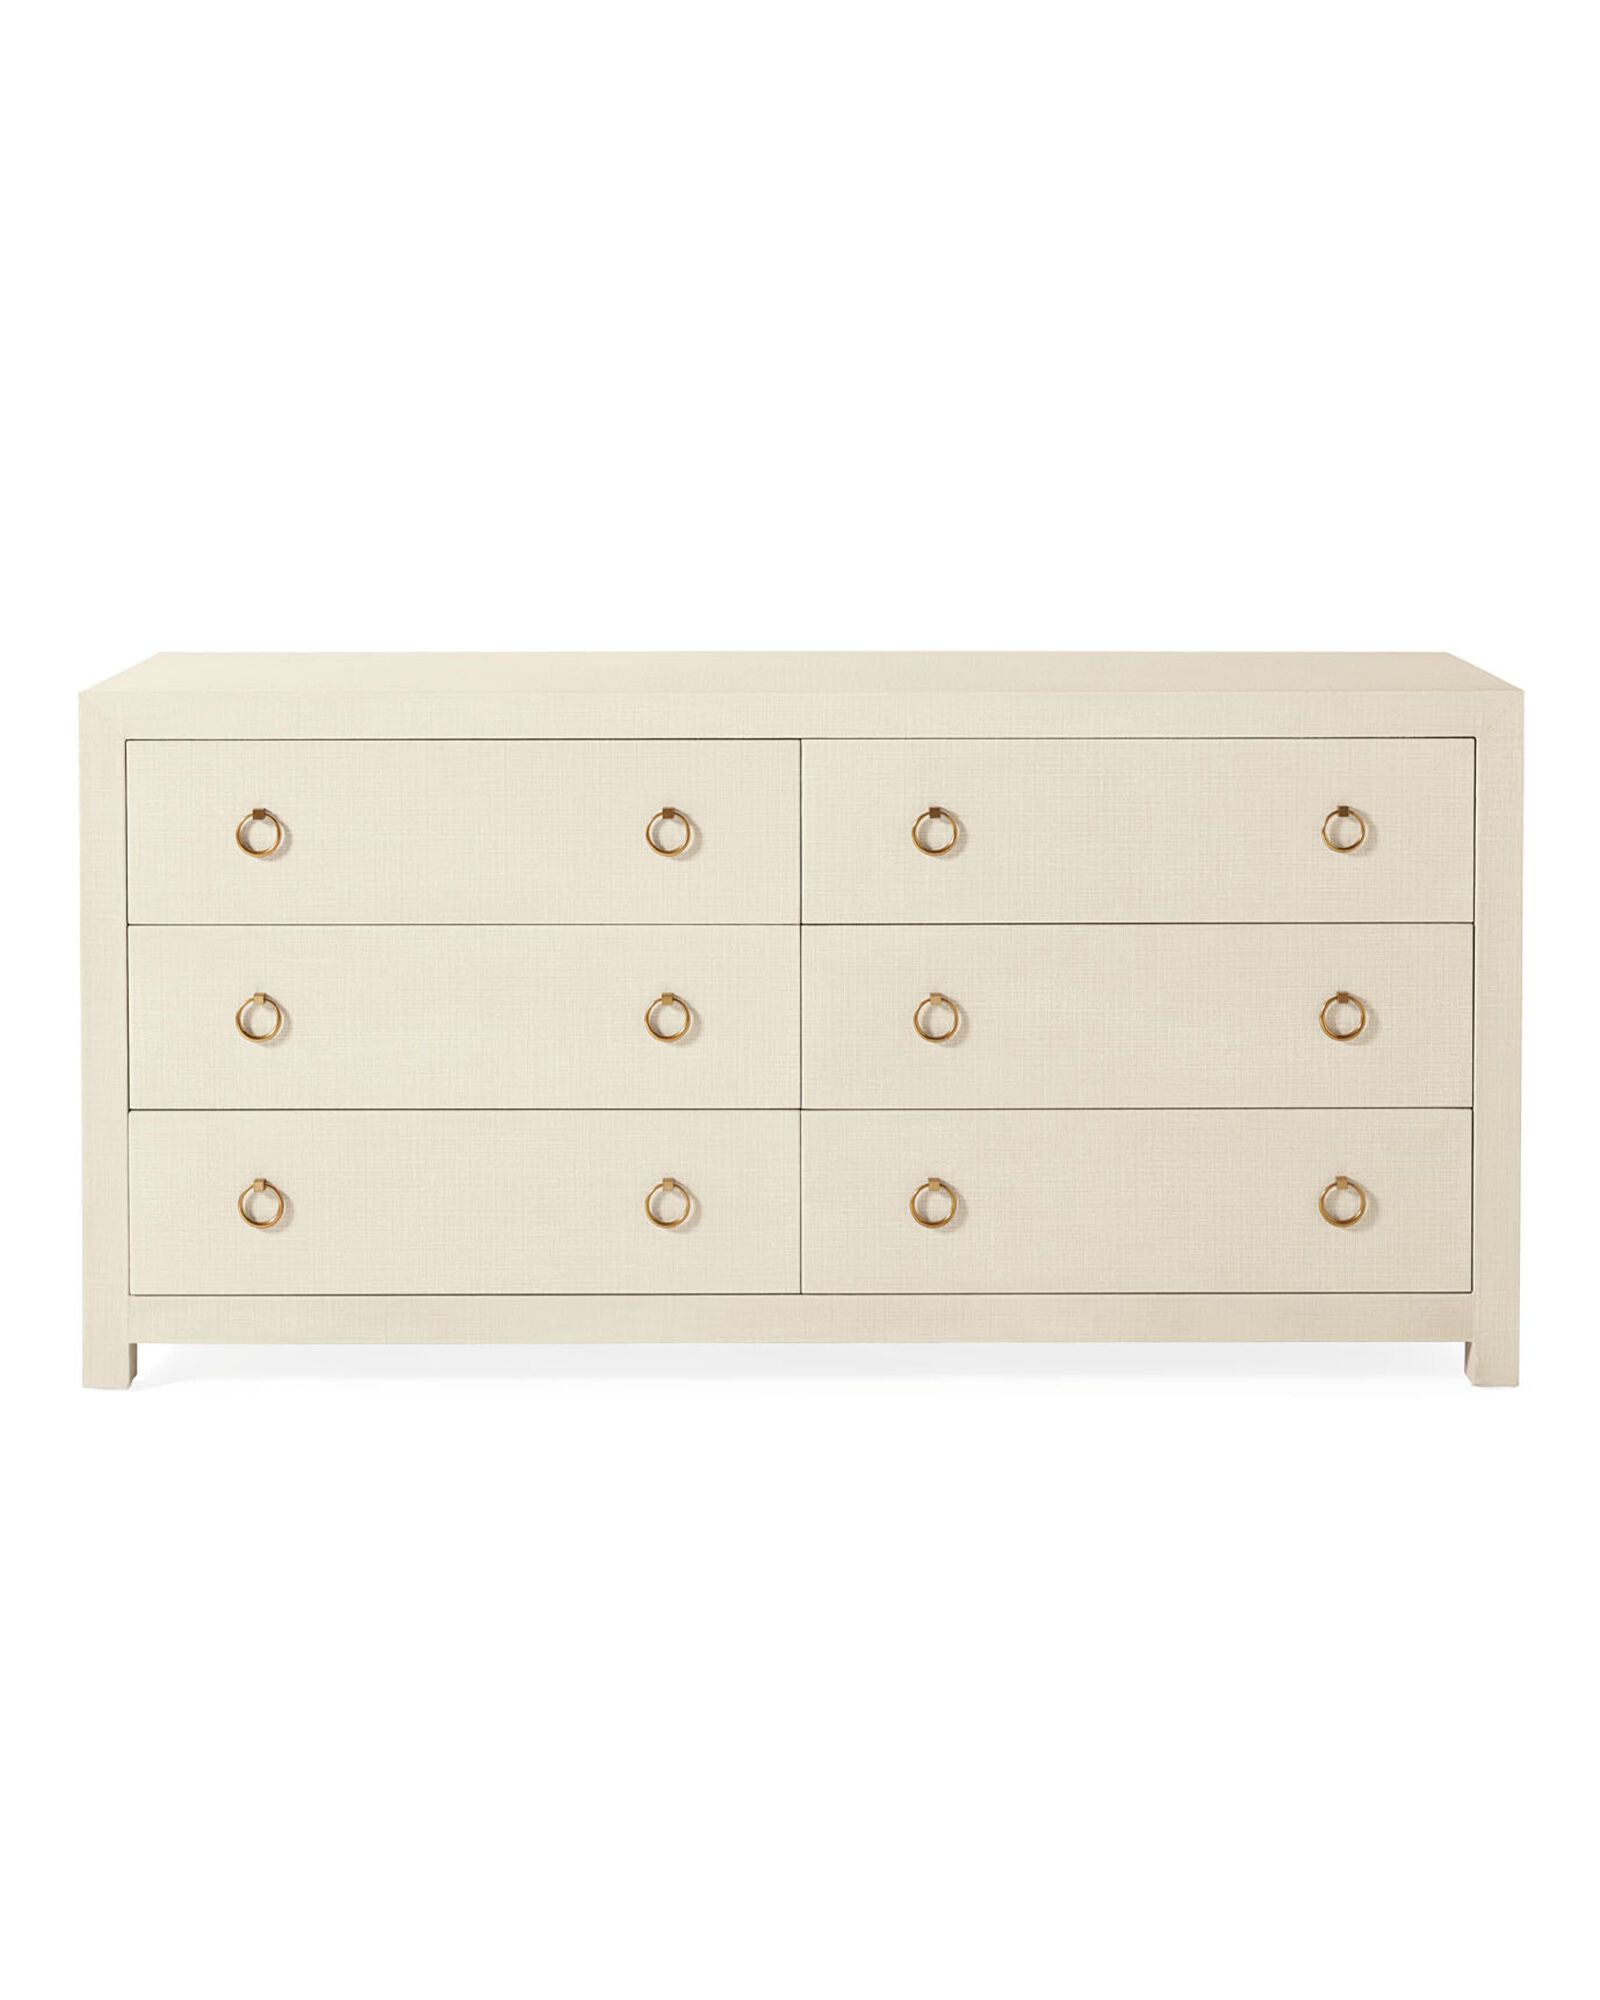 Driftway Dresser | Serena and Lily